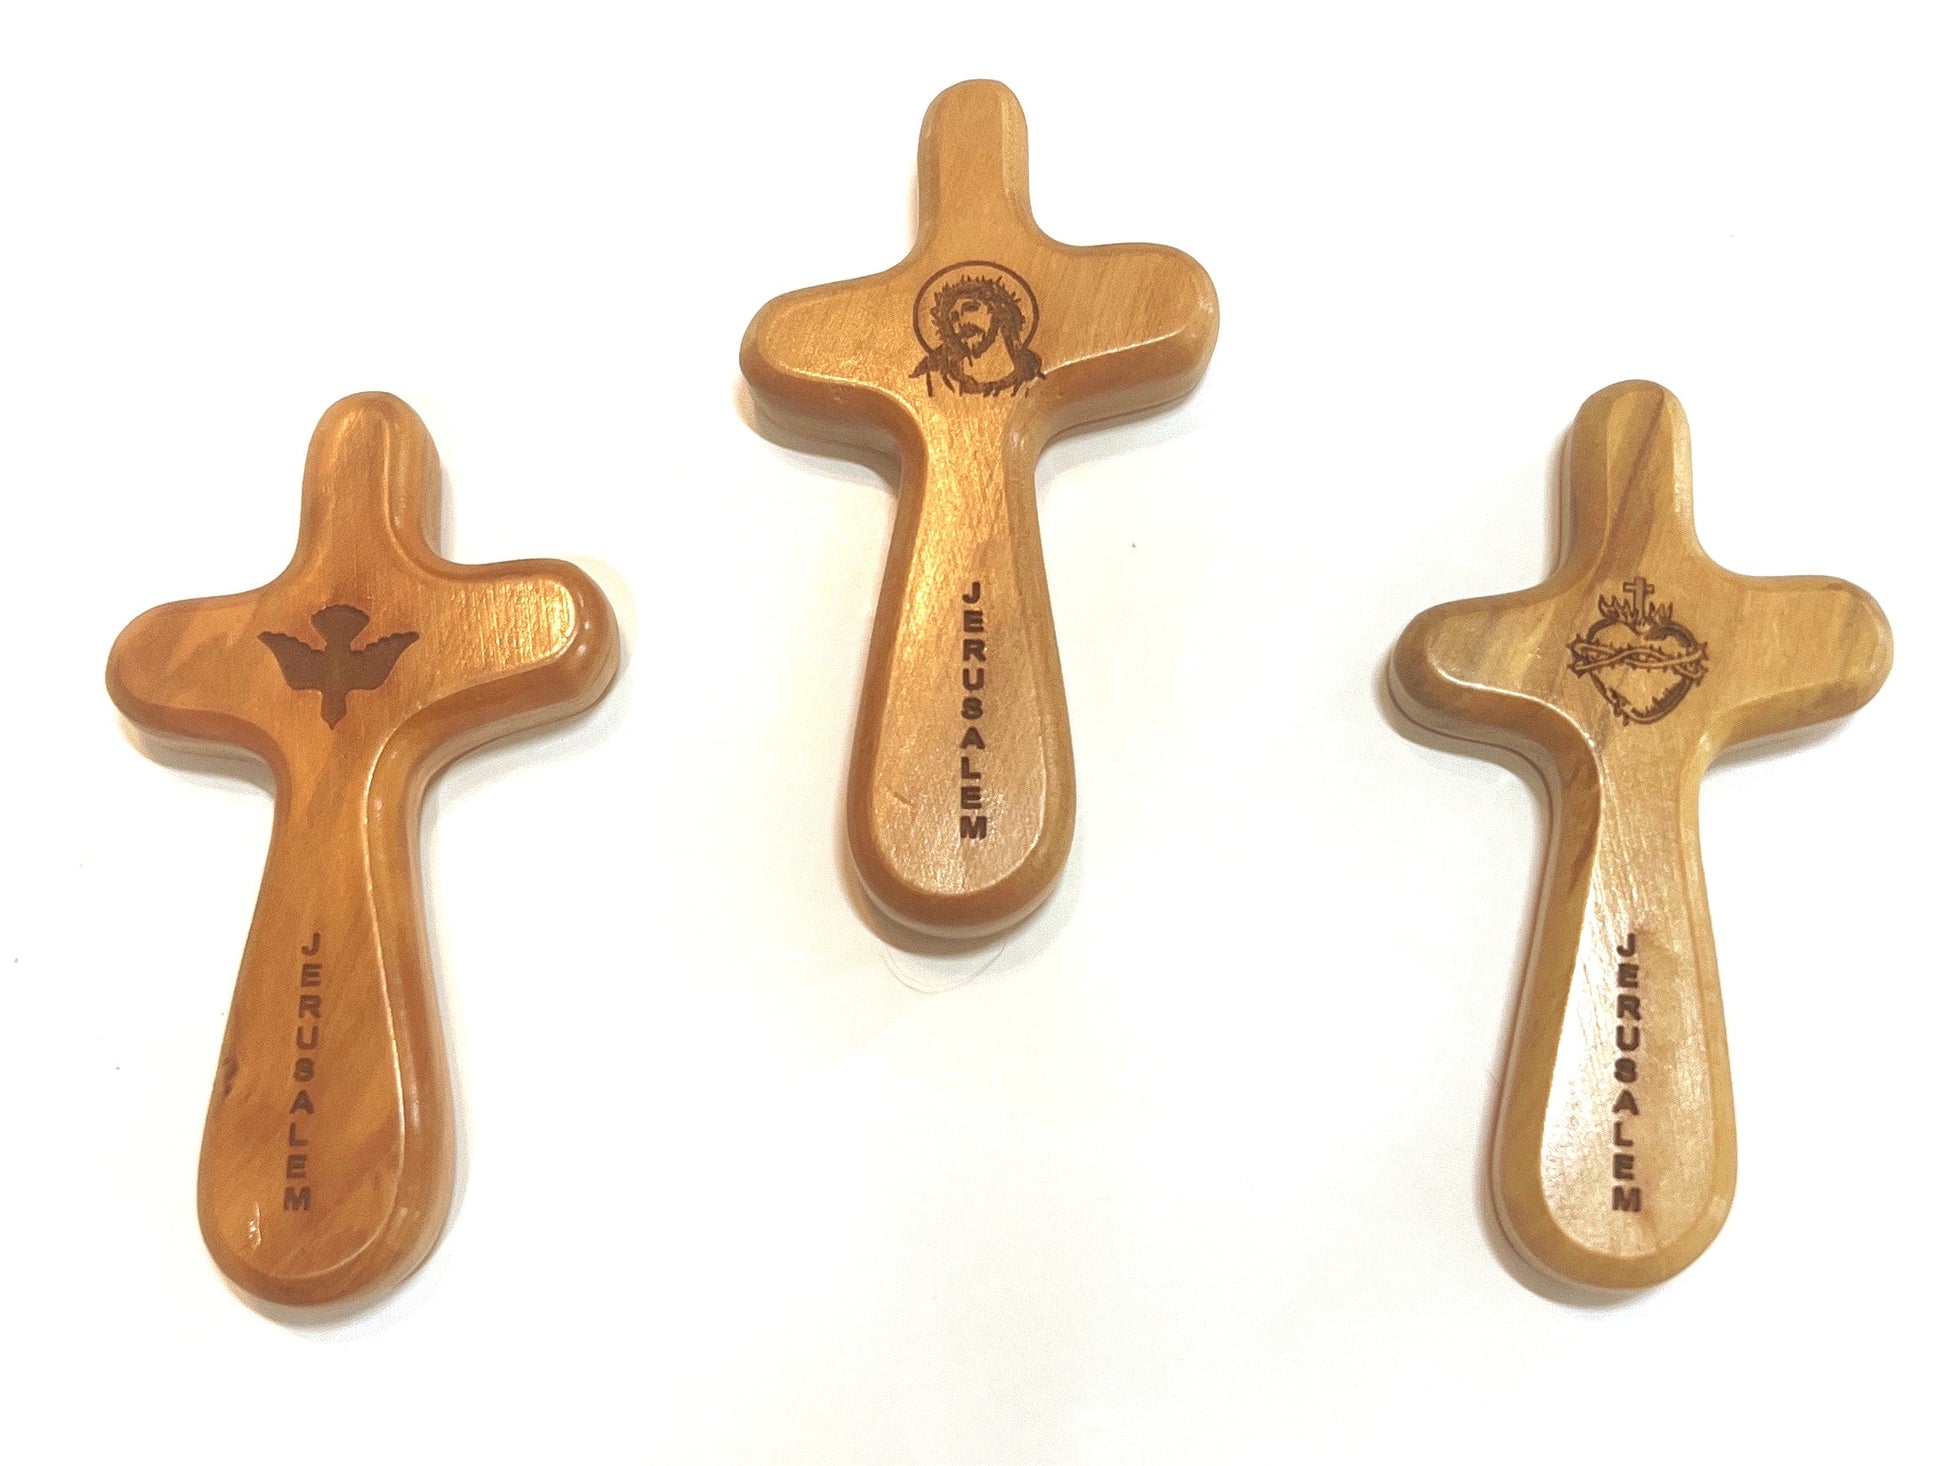 Wooden Comfort Crosses, Engraved with Scared Heart of Jesus, Holy Spirit Dove, Christ Crown of Thrones, Made in the Holy Land from Olive Wood 